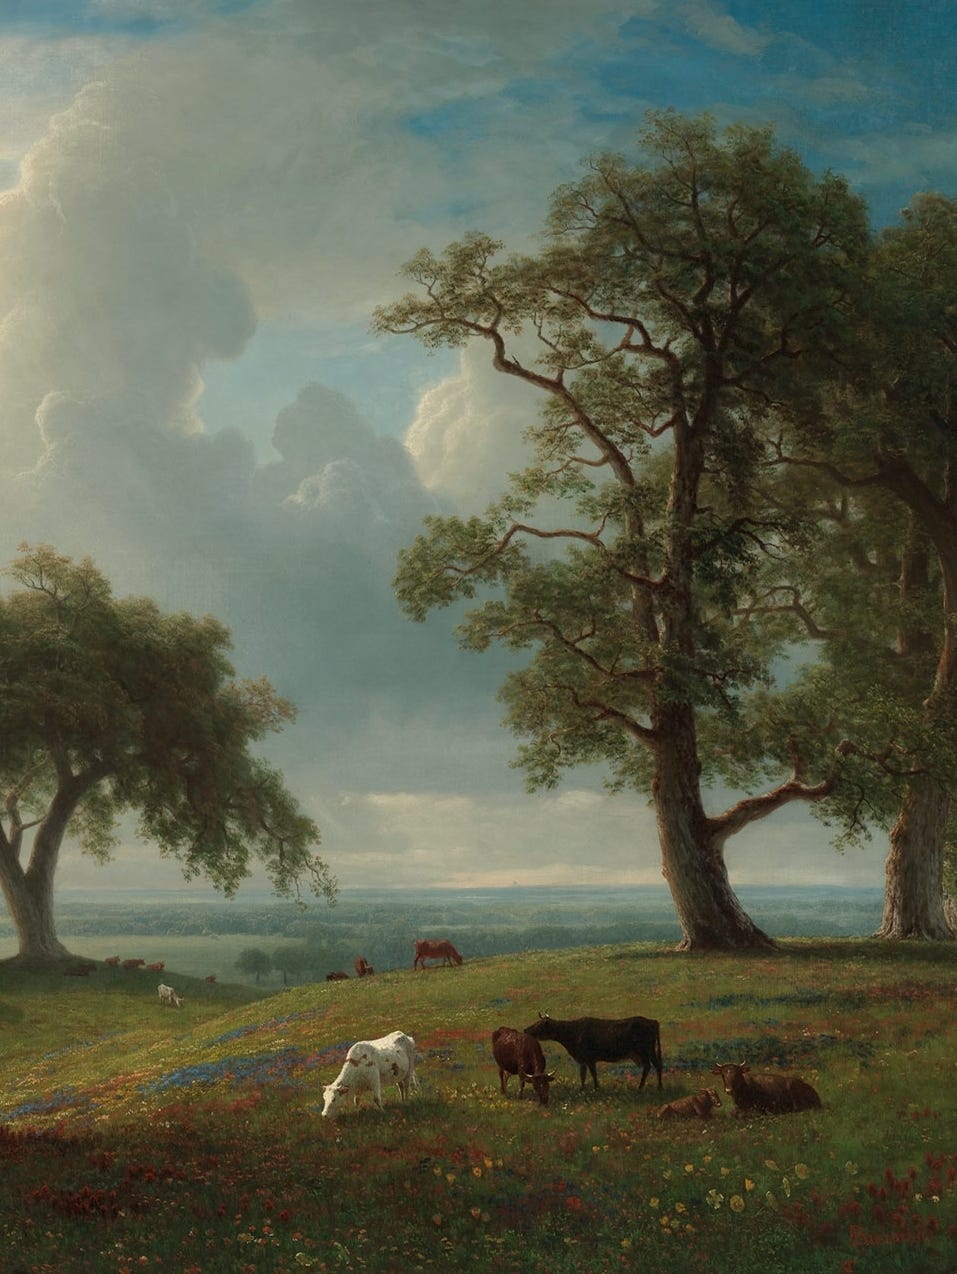 landscape with trees, animals and a stormy sky